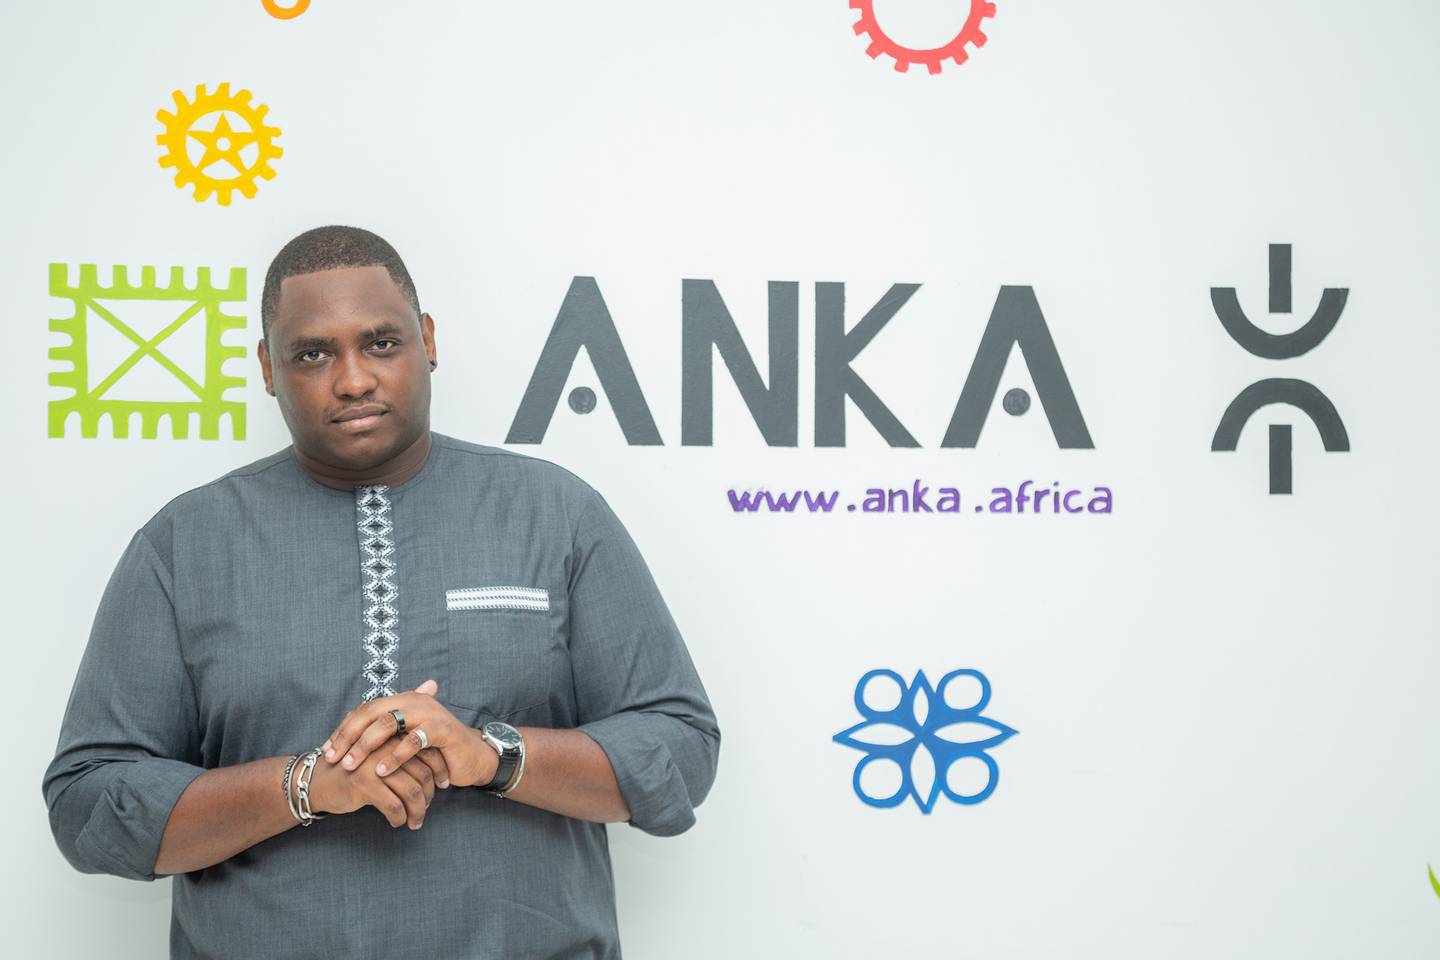 Moulaye Taboure is co-founder and chief executive at the newly rebranded Anka.